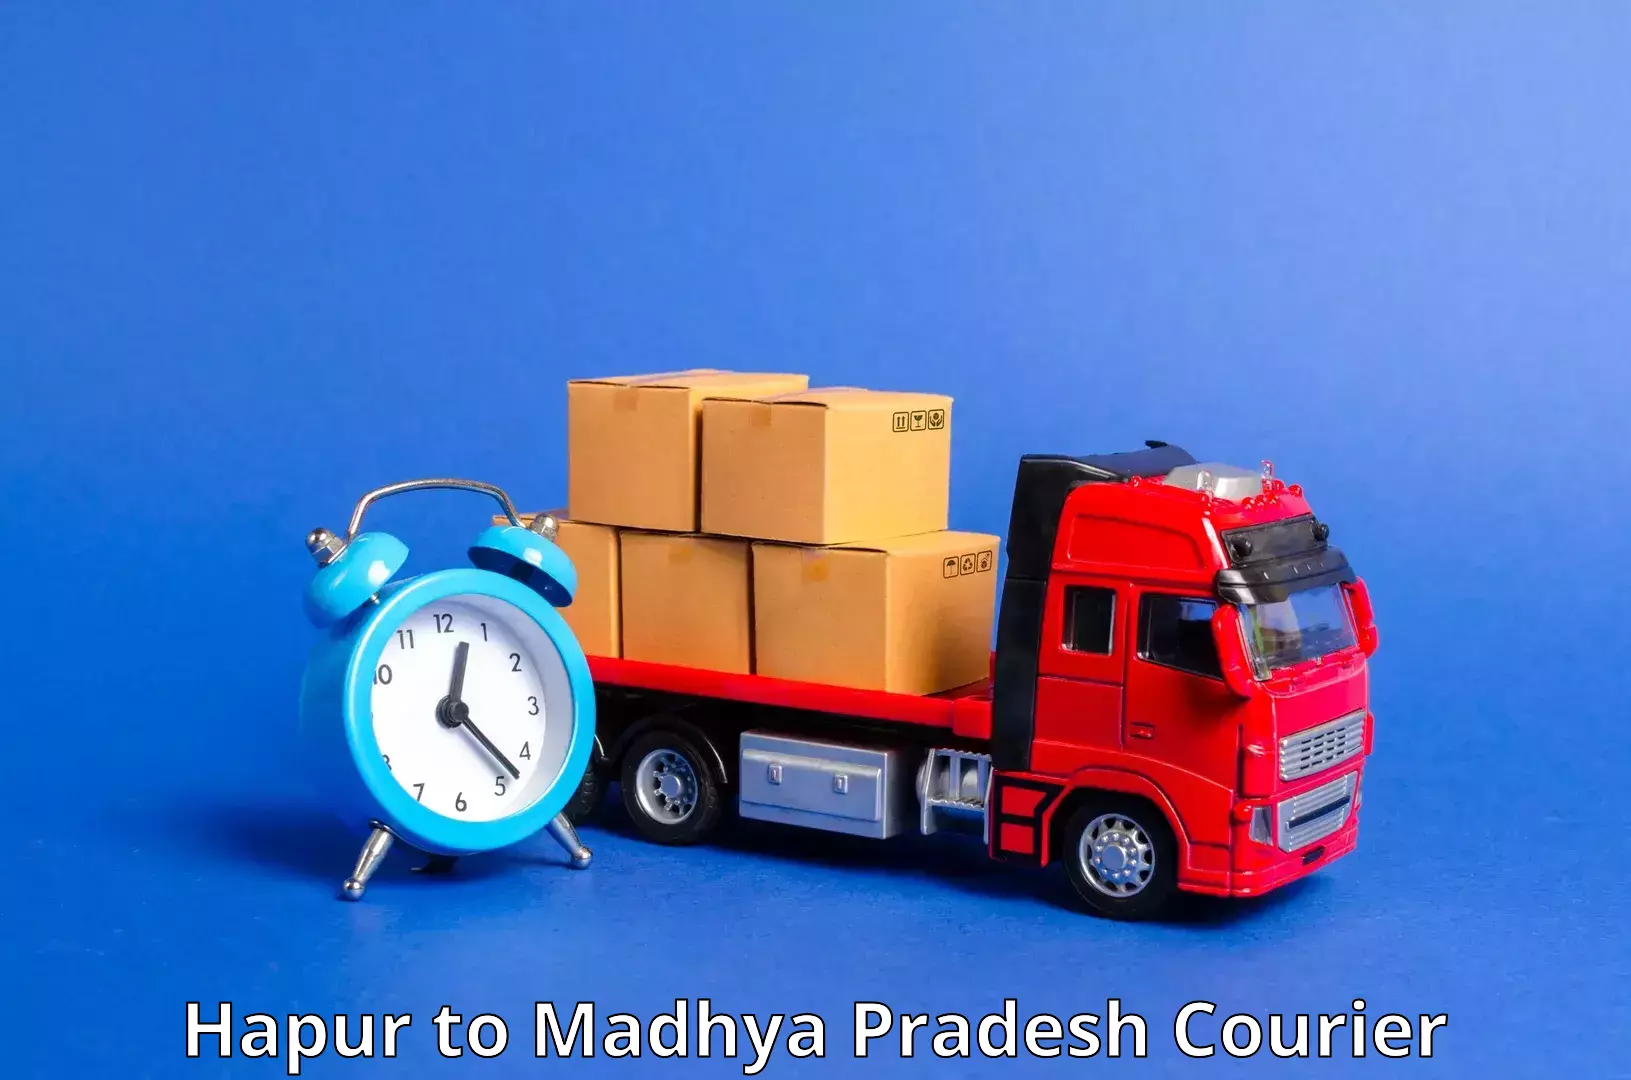 Comprehensive shipping services Hapur to Bhind